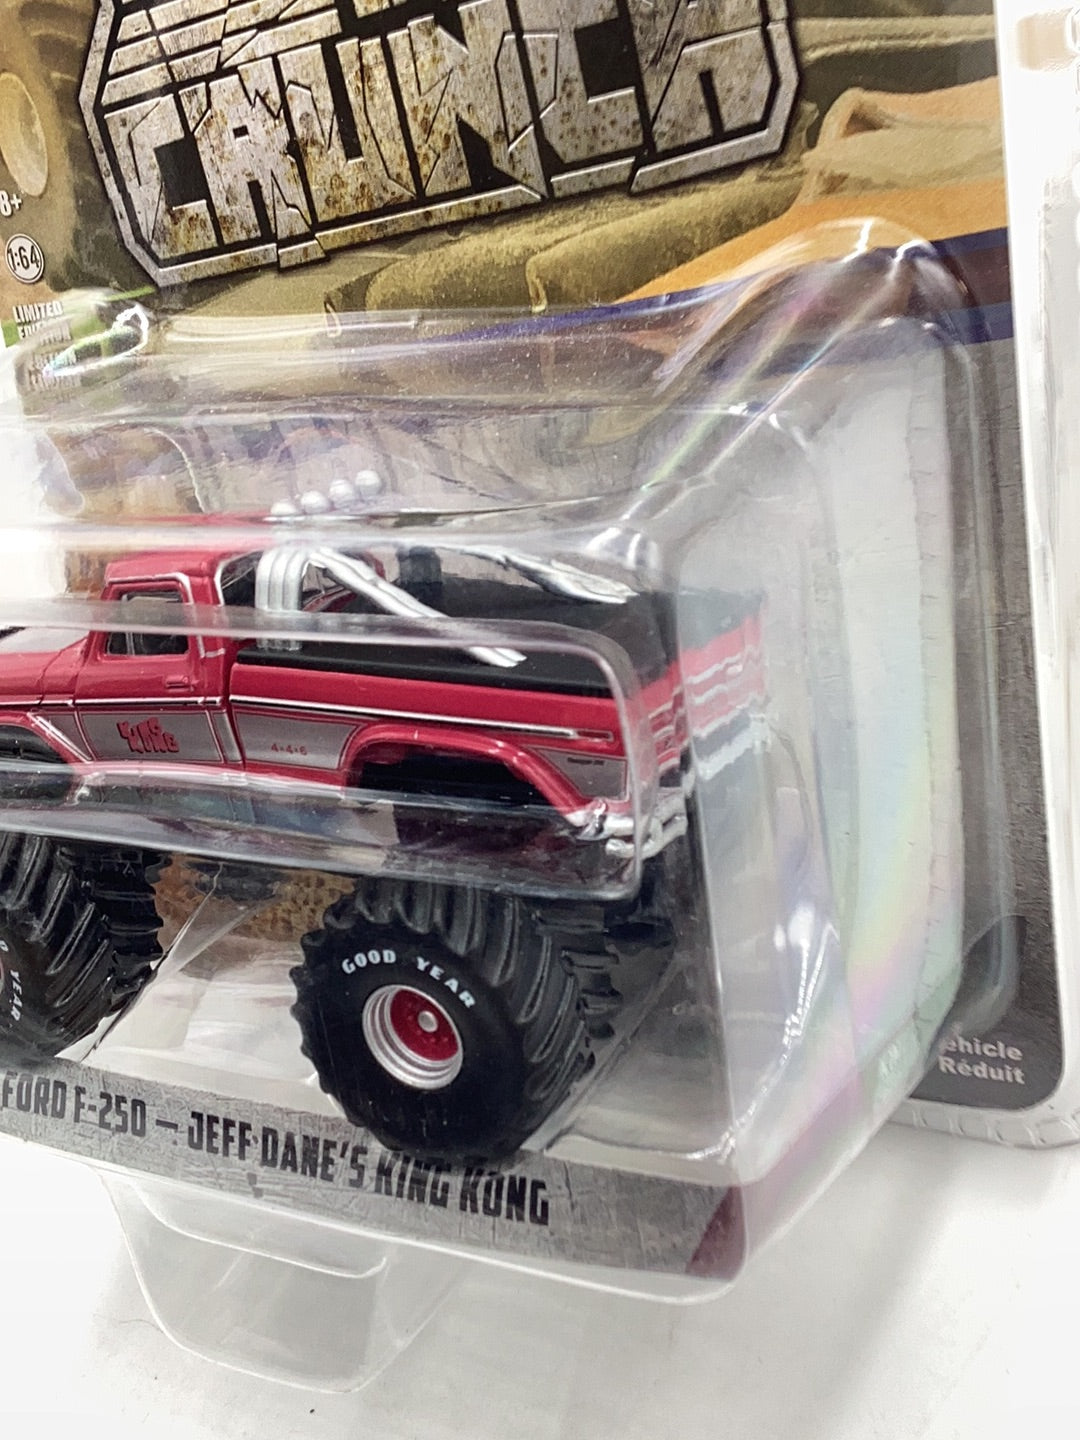 Greenlight Kings of crunch 1975 Ford F-250 Jeff Danes King Kong